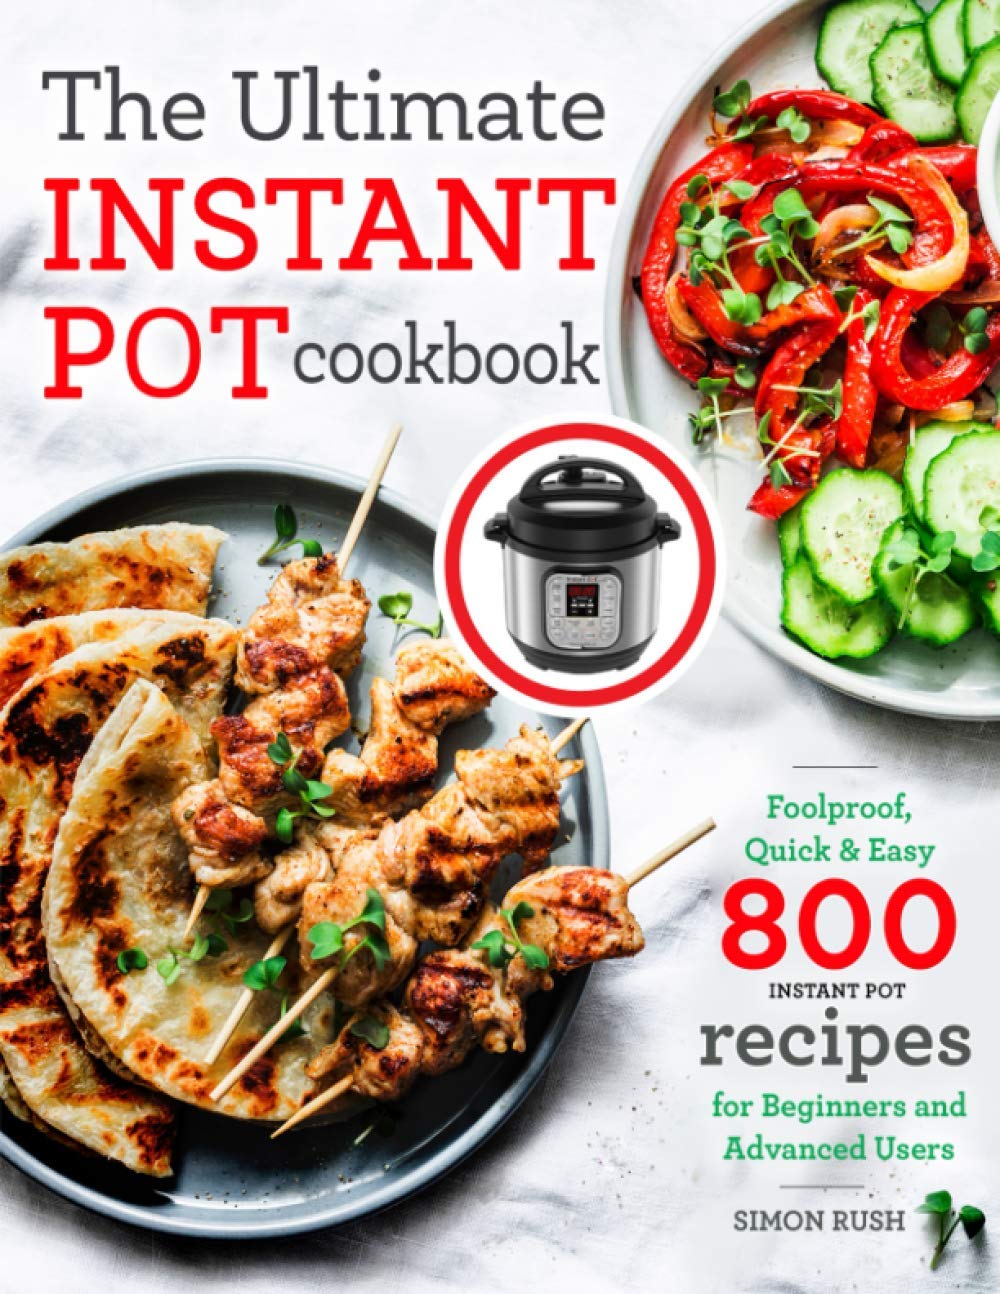 The Ultimate Instant Pot cookbook: Foolproof, Quick  Easy 800 Instant Pot Recipes for Beginners and Advanced Users     Paperback – October 12, 2019